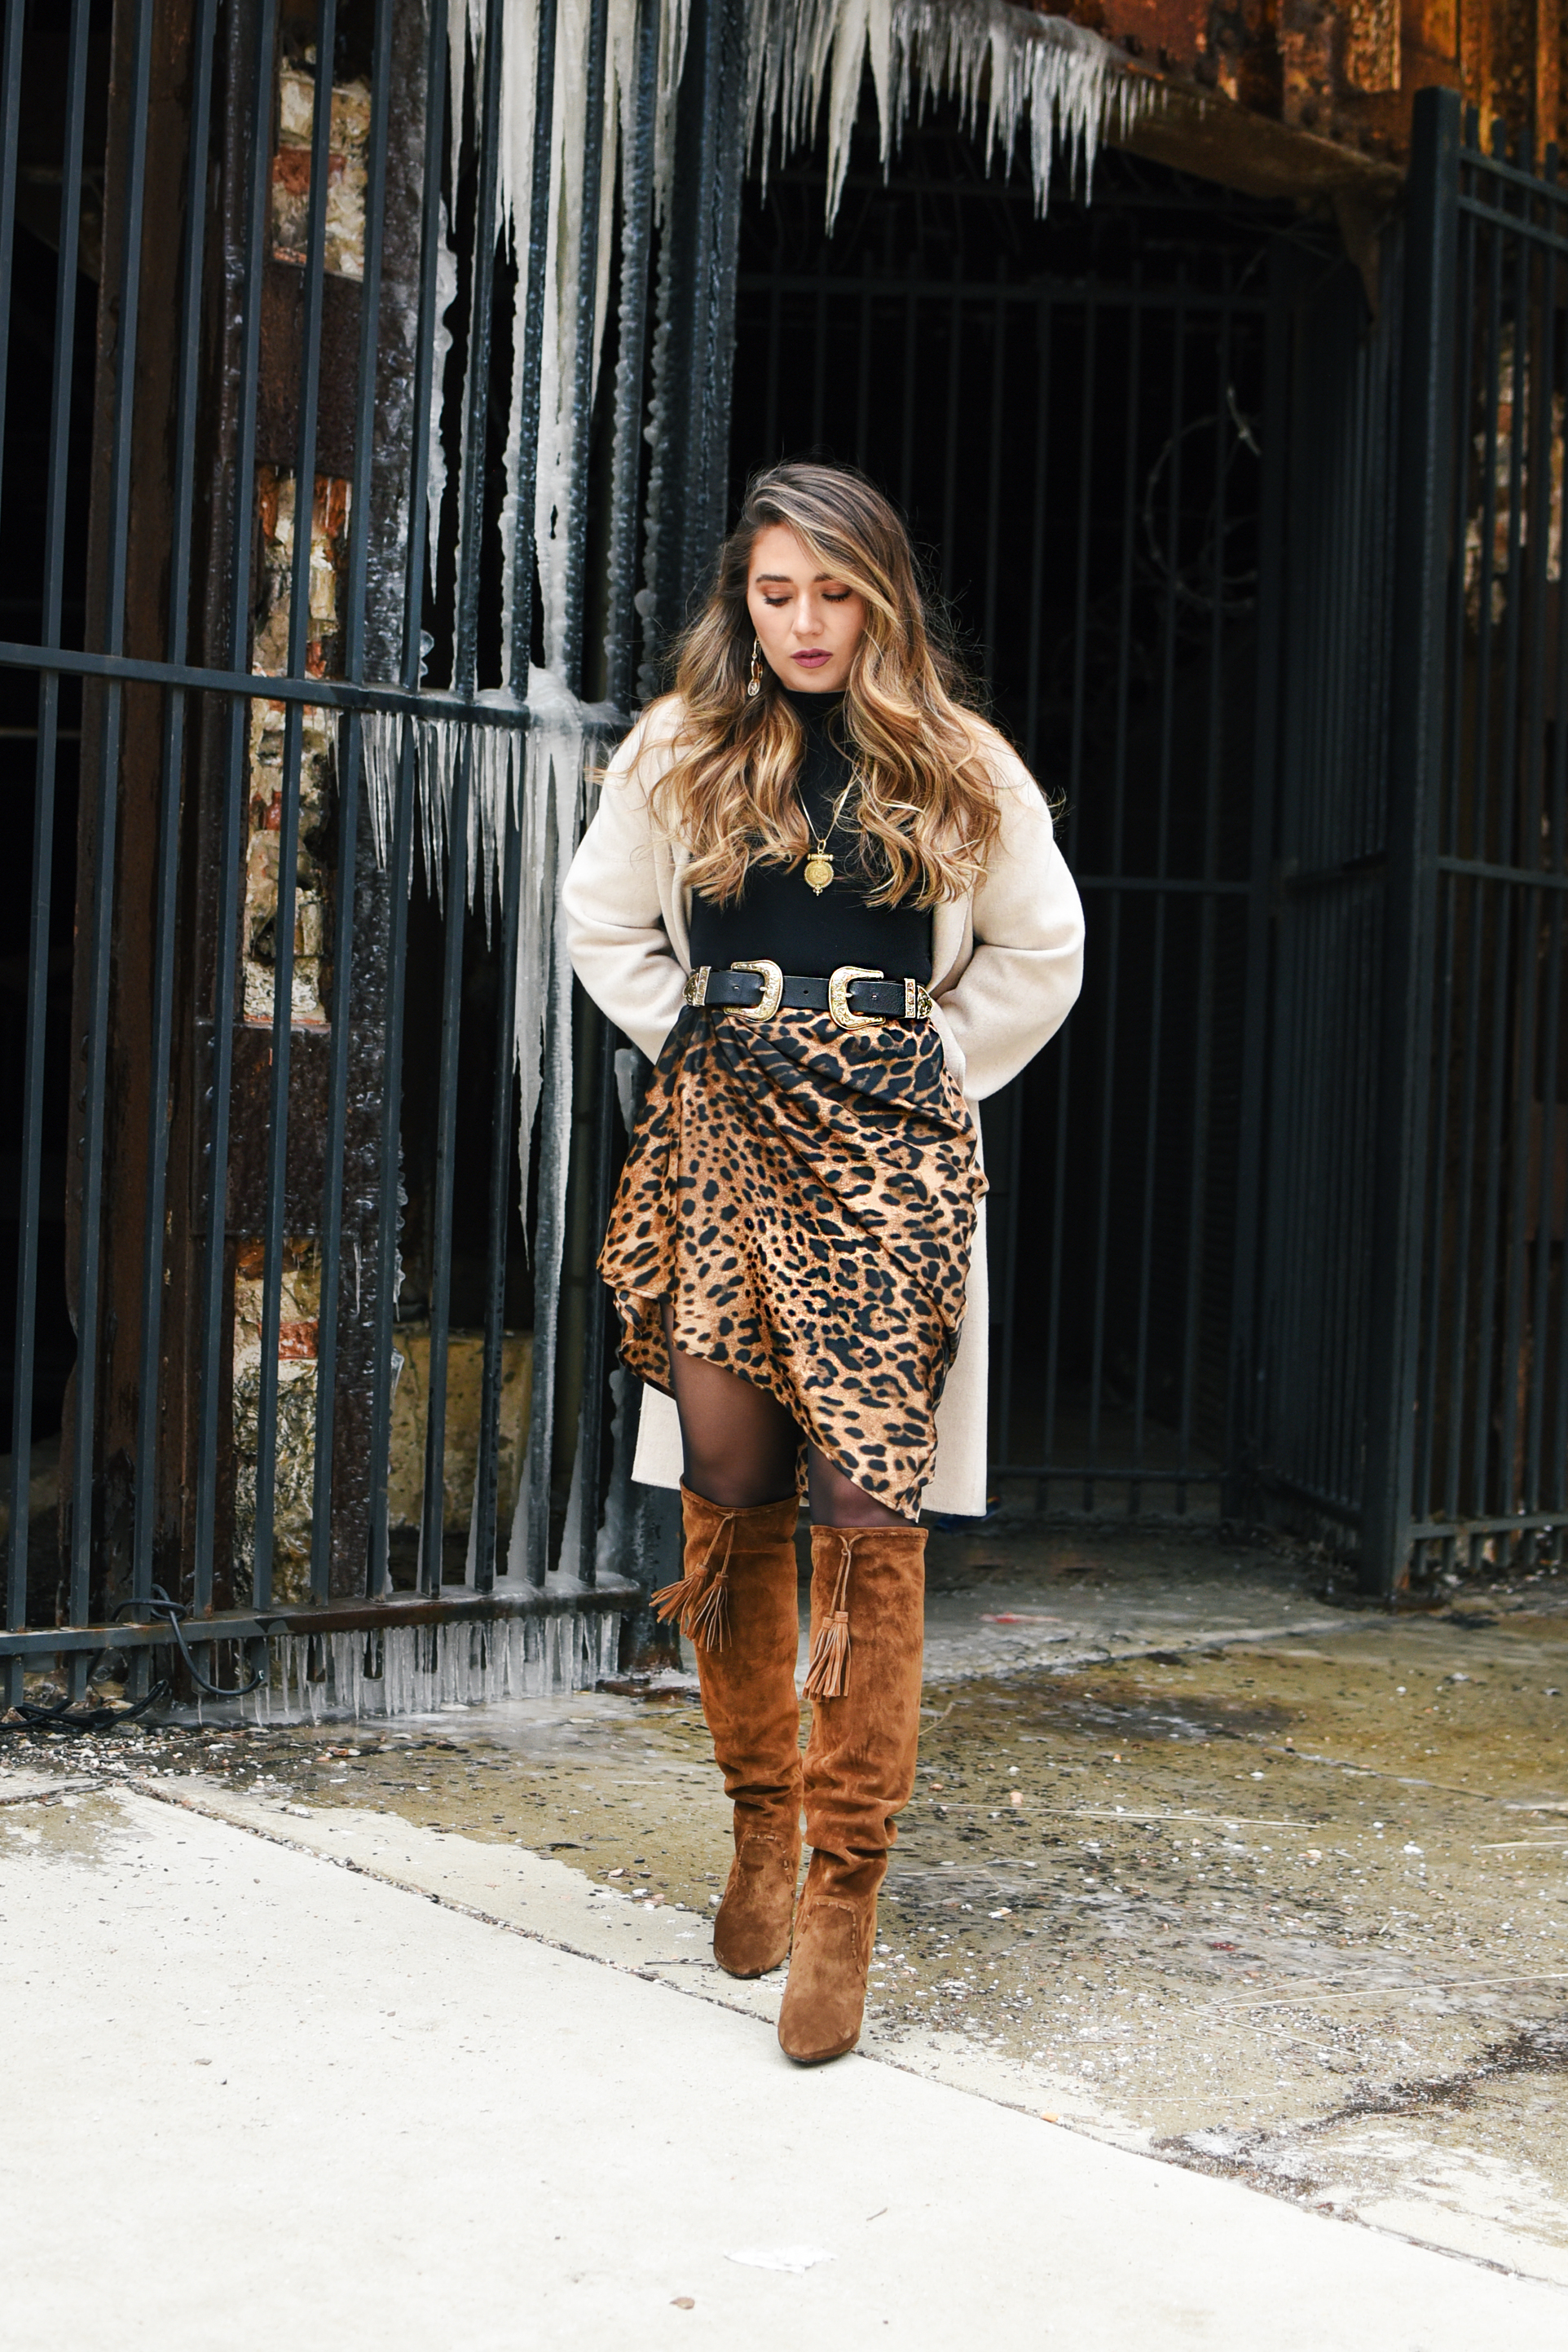 cheetah-skirt-ysl-fringe-boot-long-trench-coat-winter-spring-layers-style-outfit